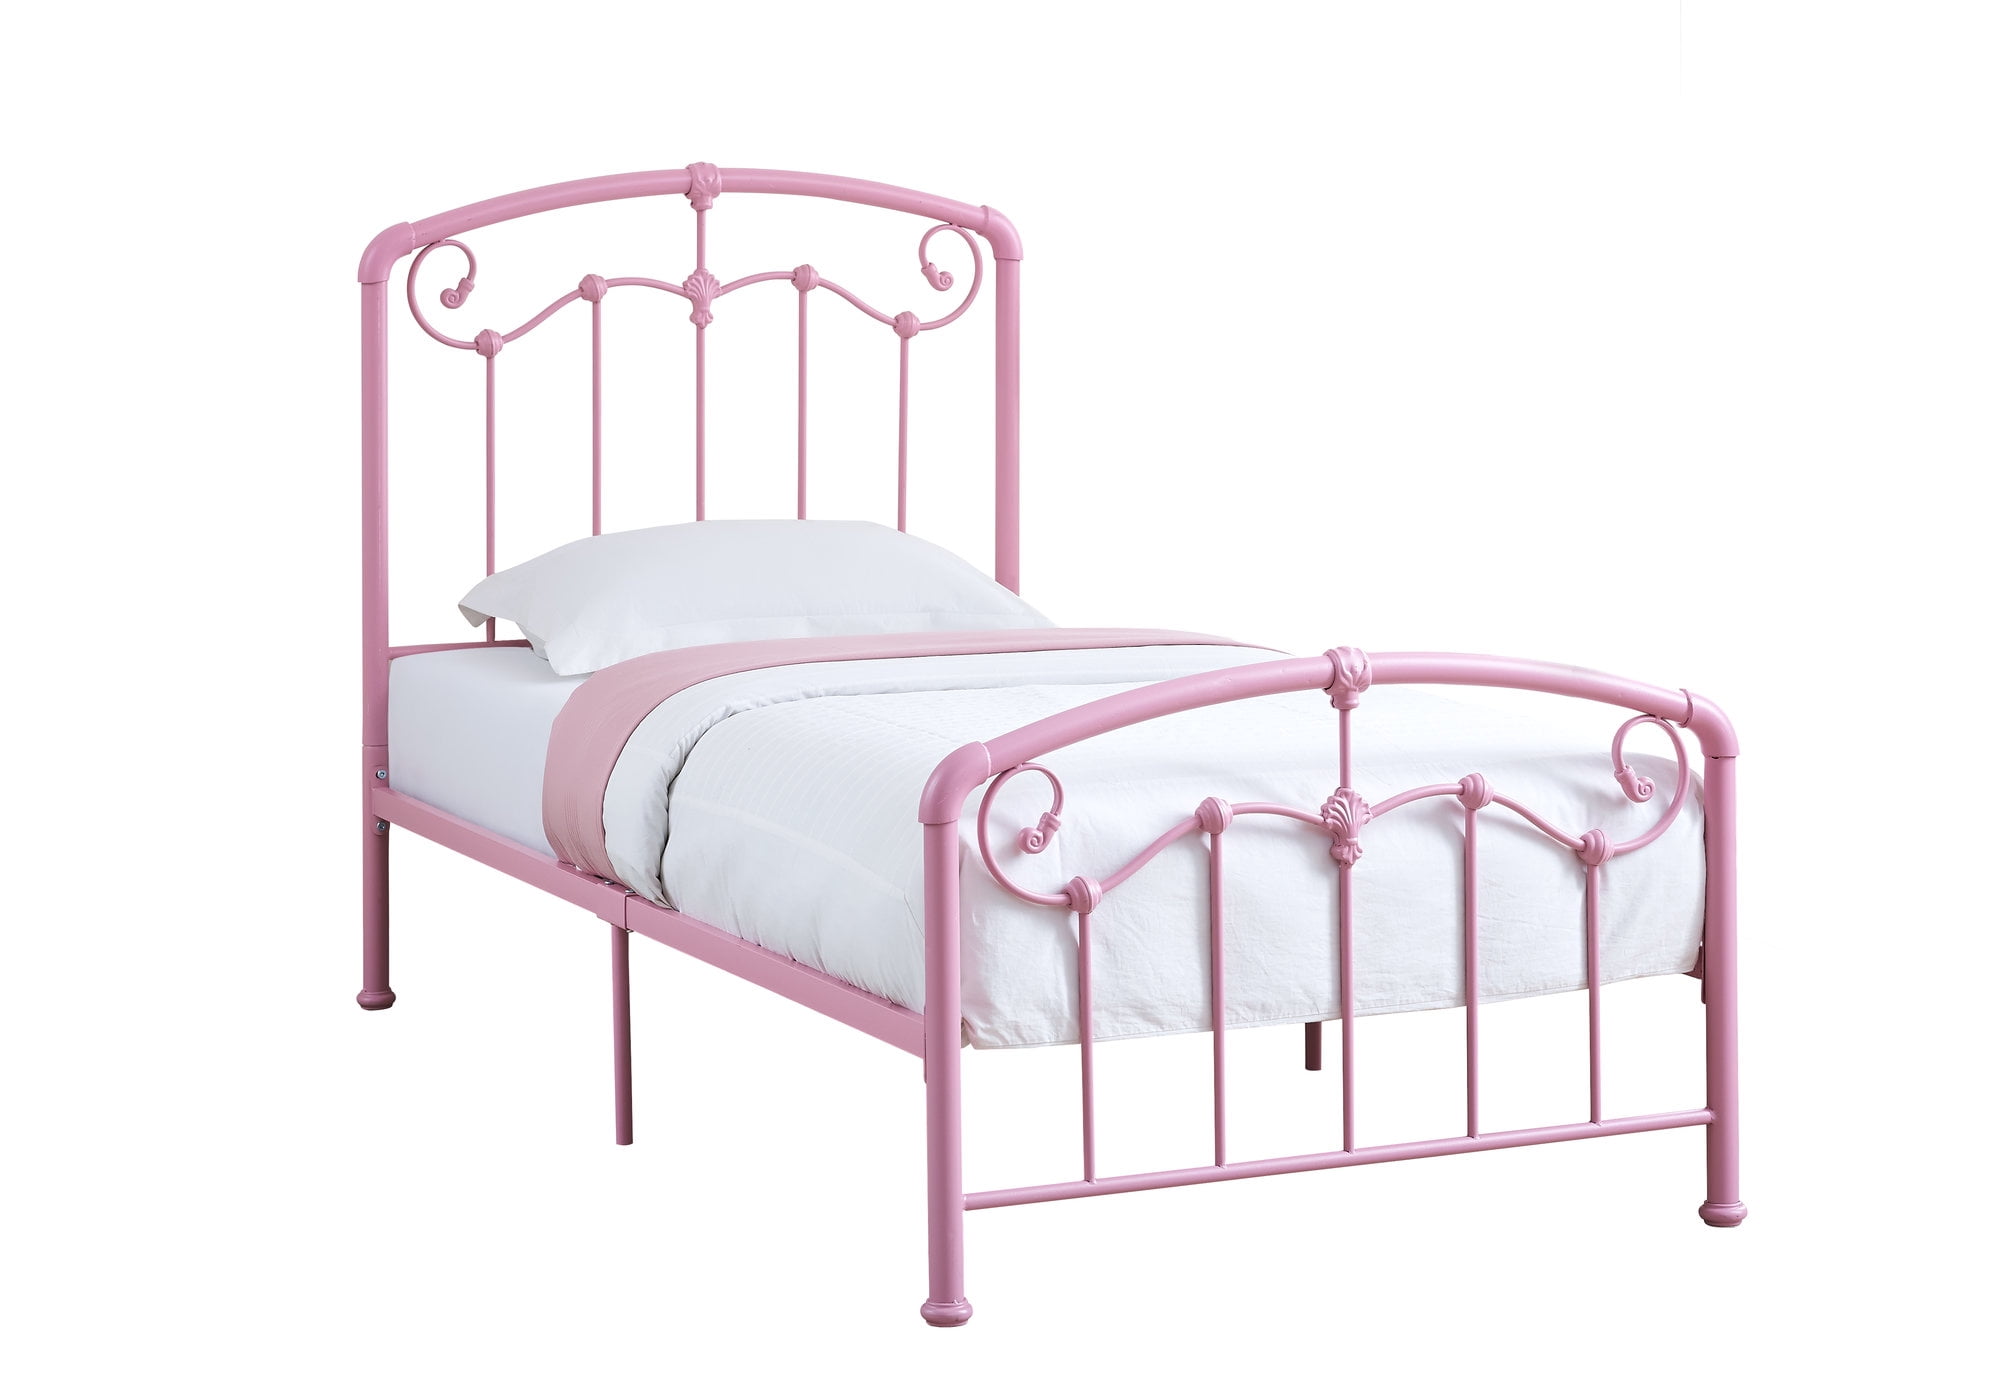 79" Matte Pink Contemporary Style Rectangular Bed Frame - Twin Size